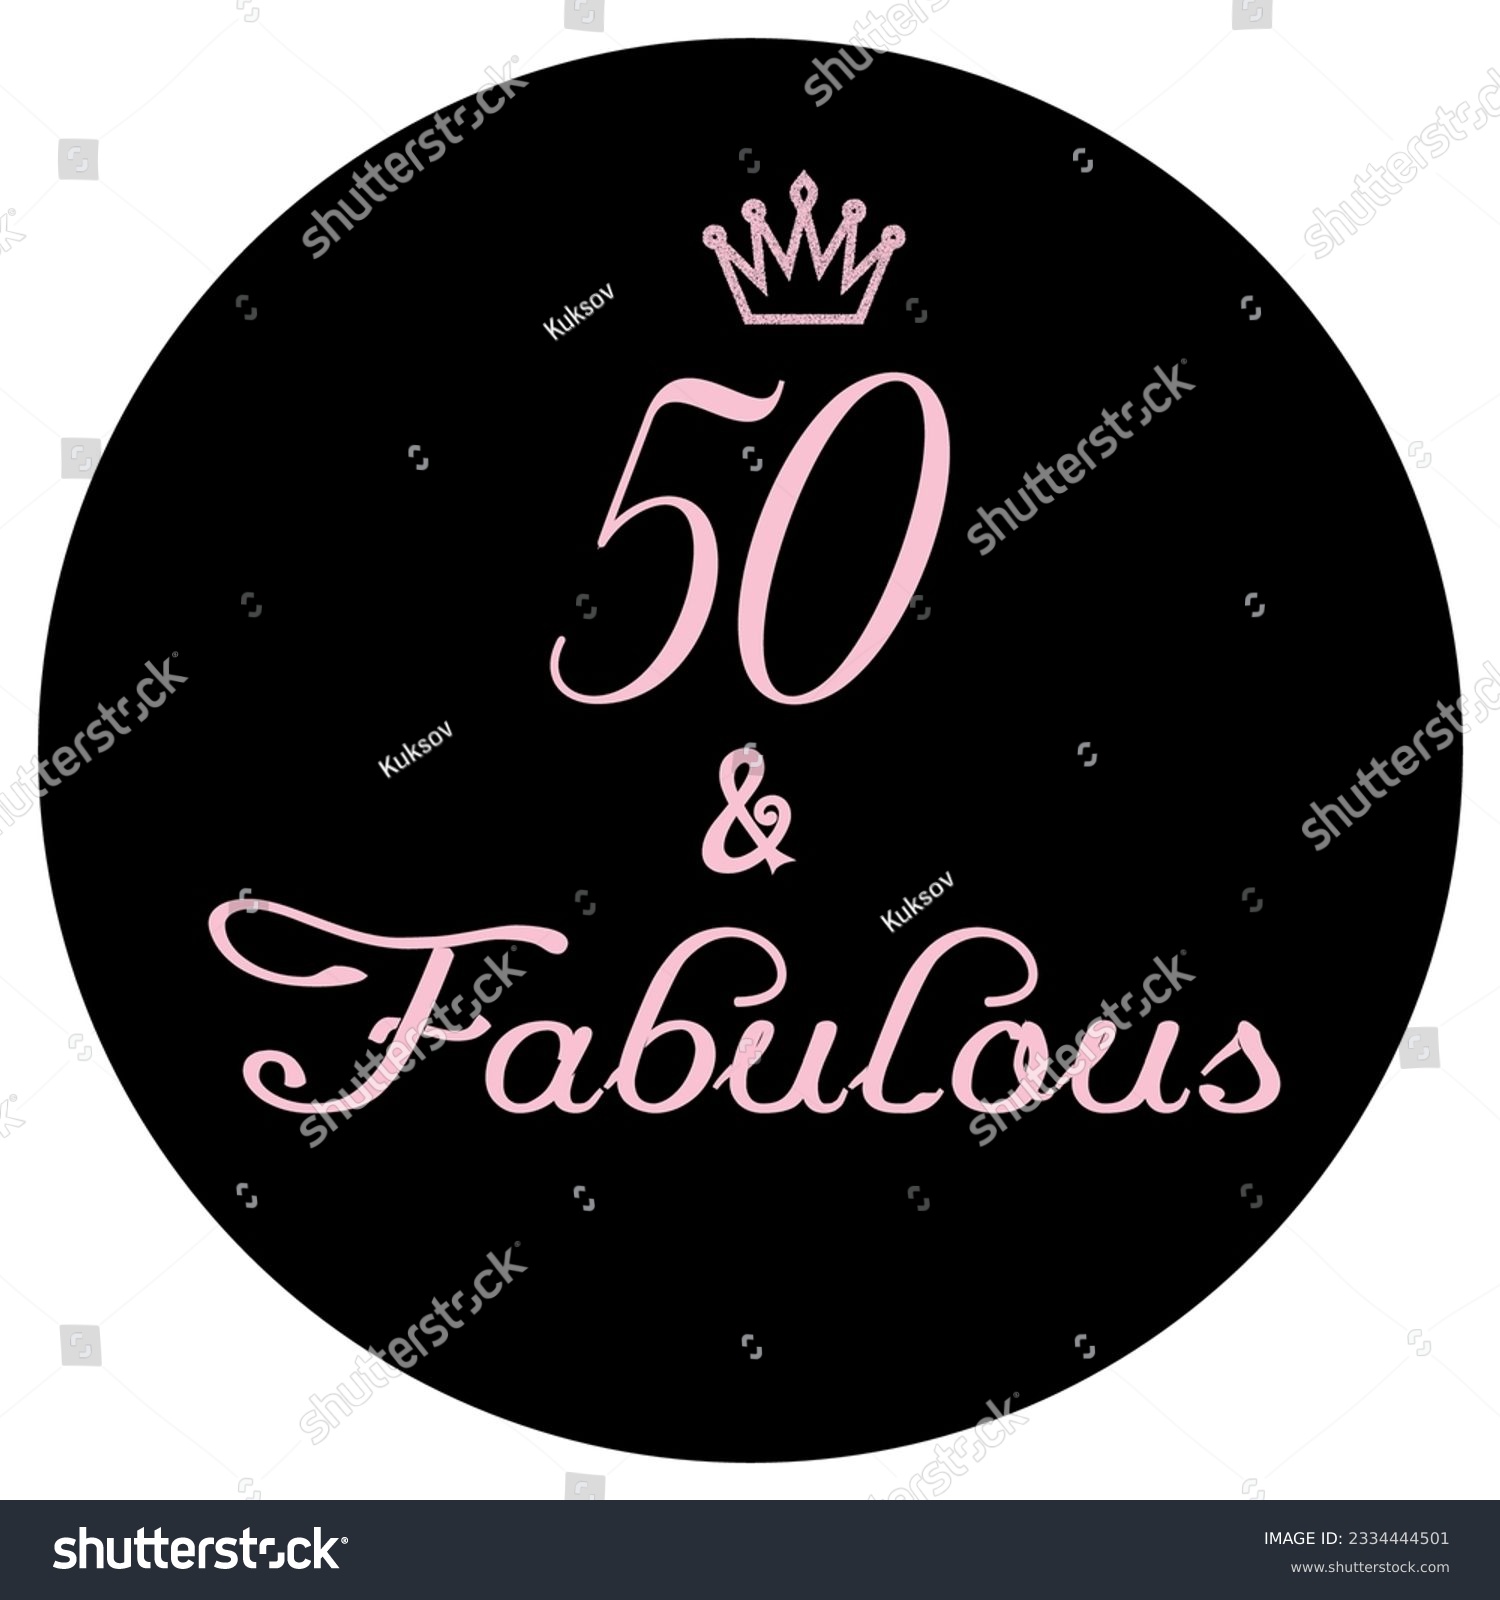 SVG of 50  fabulous. Fabulous Fifty birthday party vector calligraphy quote on white background svg